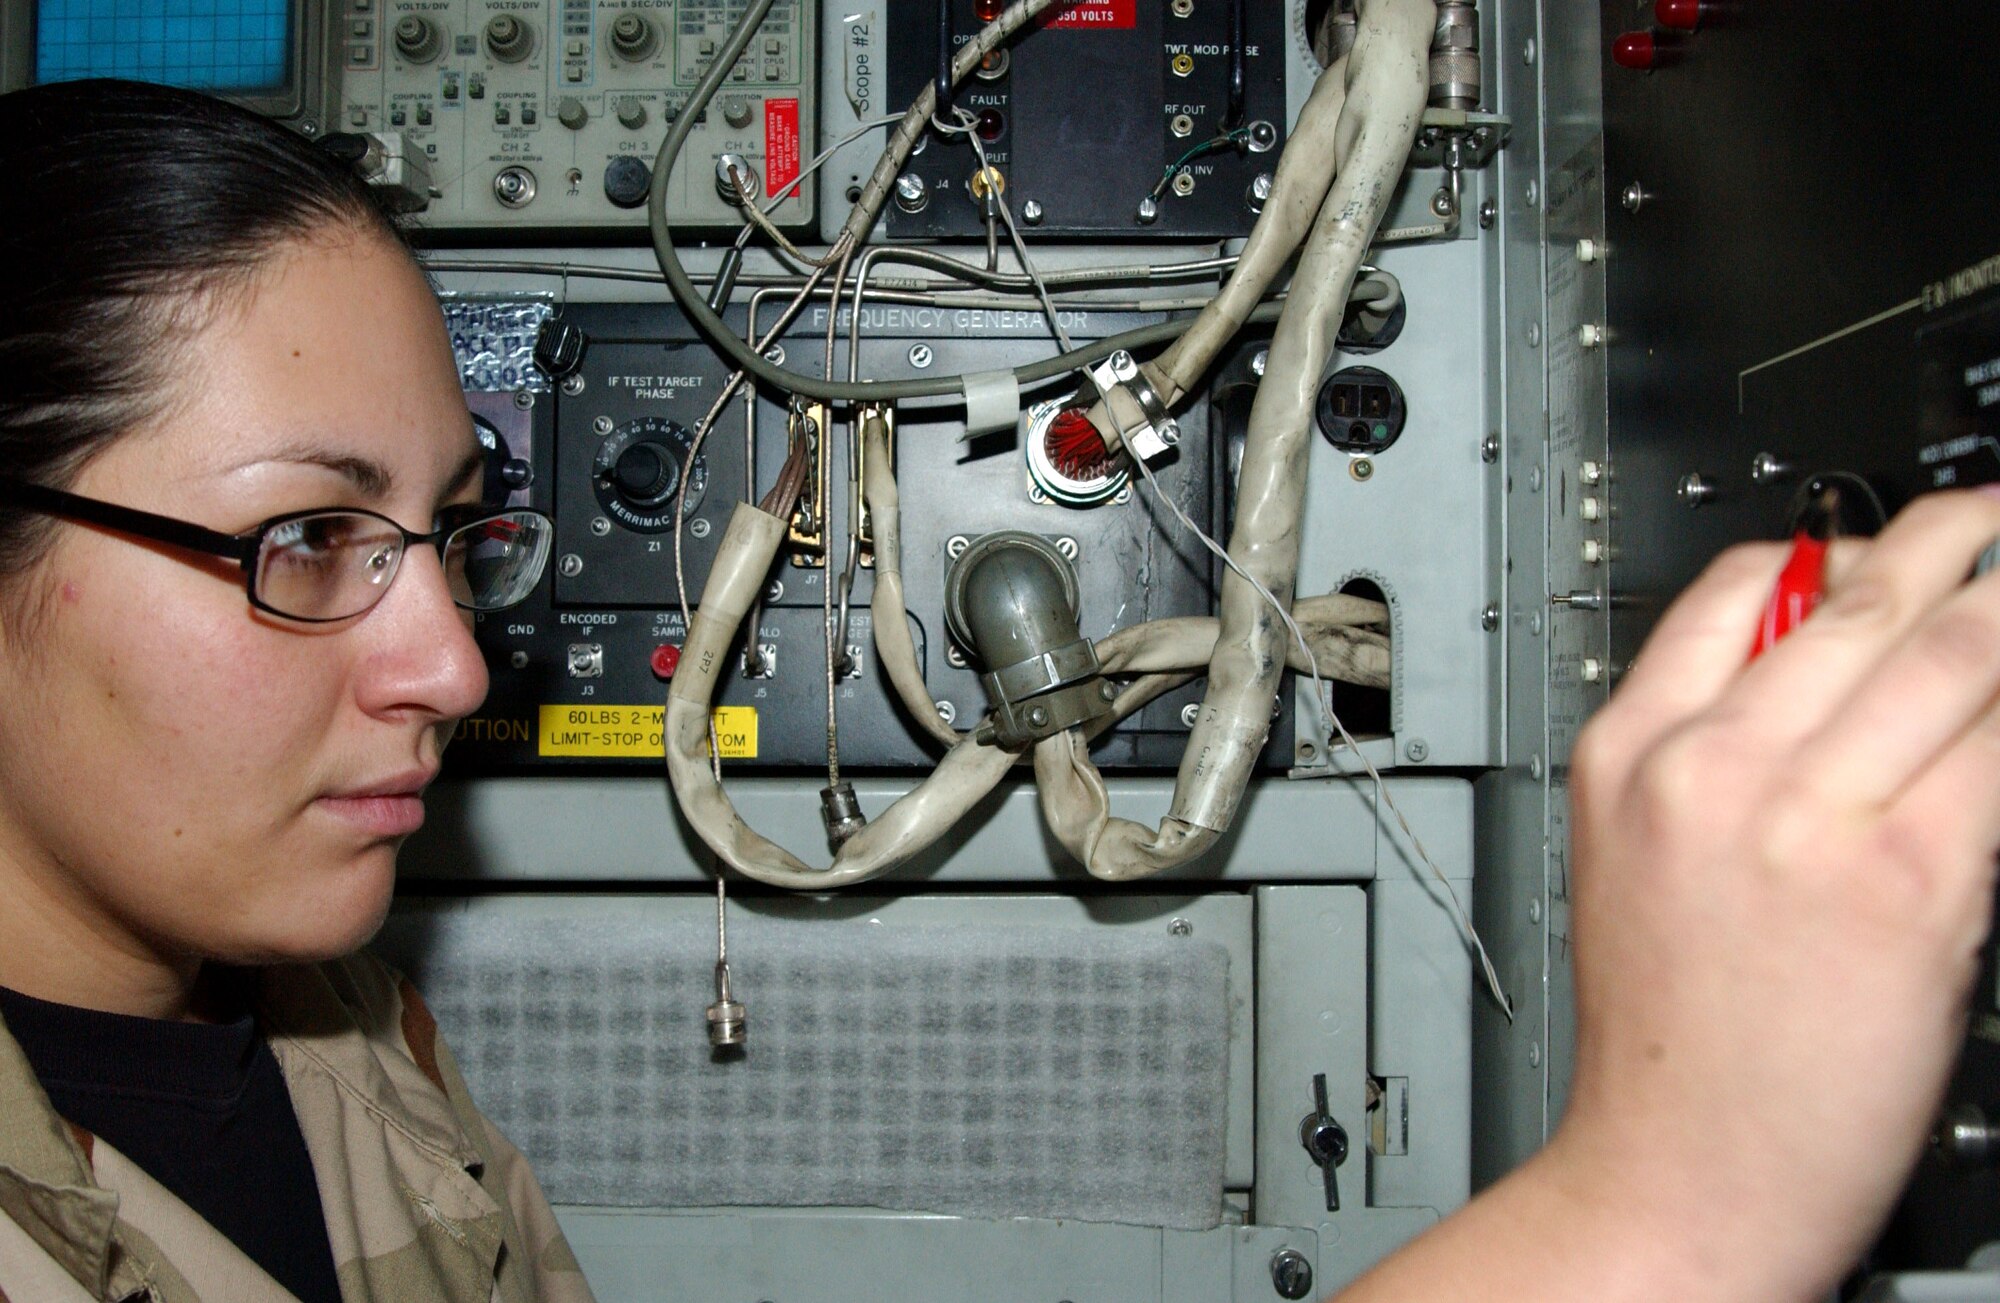 Senior Airman Adrienne Samora conducts a daily preventative maintenance inspection Dec. 19 on one of the ground radar systems at Balad Air Base, Iraq. Airman Samora, a 727th Expeditionary Air Control Squadron radar maintenance technician, is deployed from Mountain Home Air Force Base, Idaho. (U.S. Air Force photo/Staff Sgt. Alice Moore) 